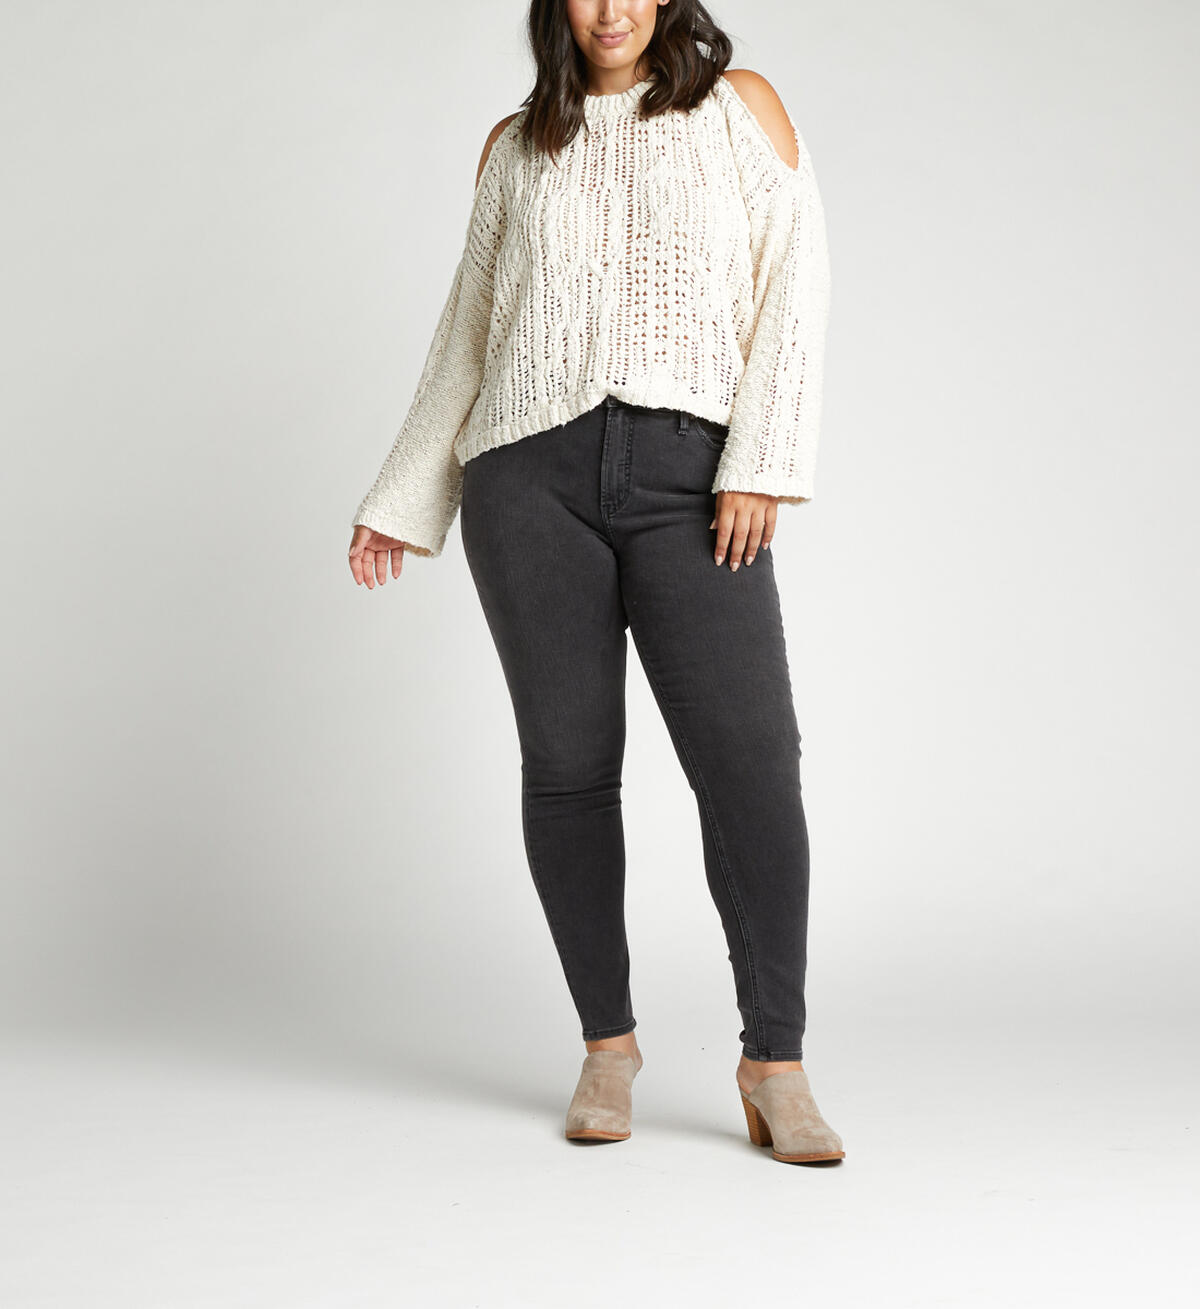 High Note High Rise Skinny Plus Size Jeans, , hi-res image number 0